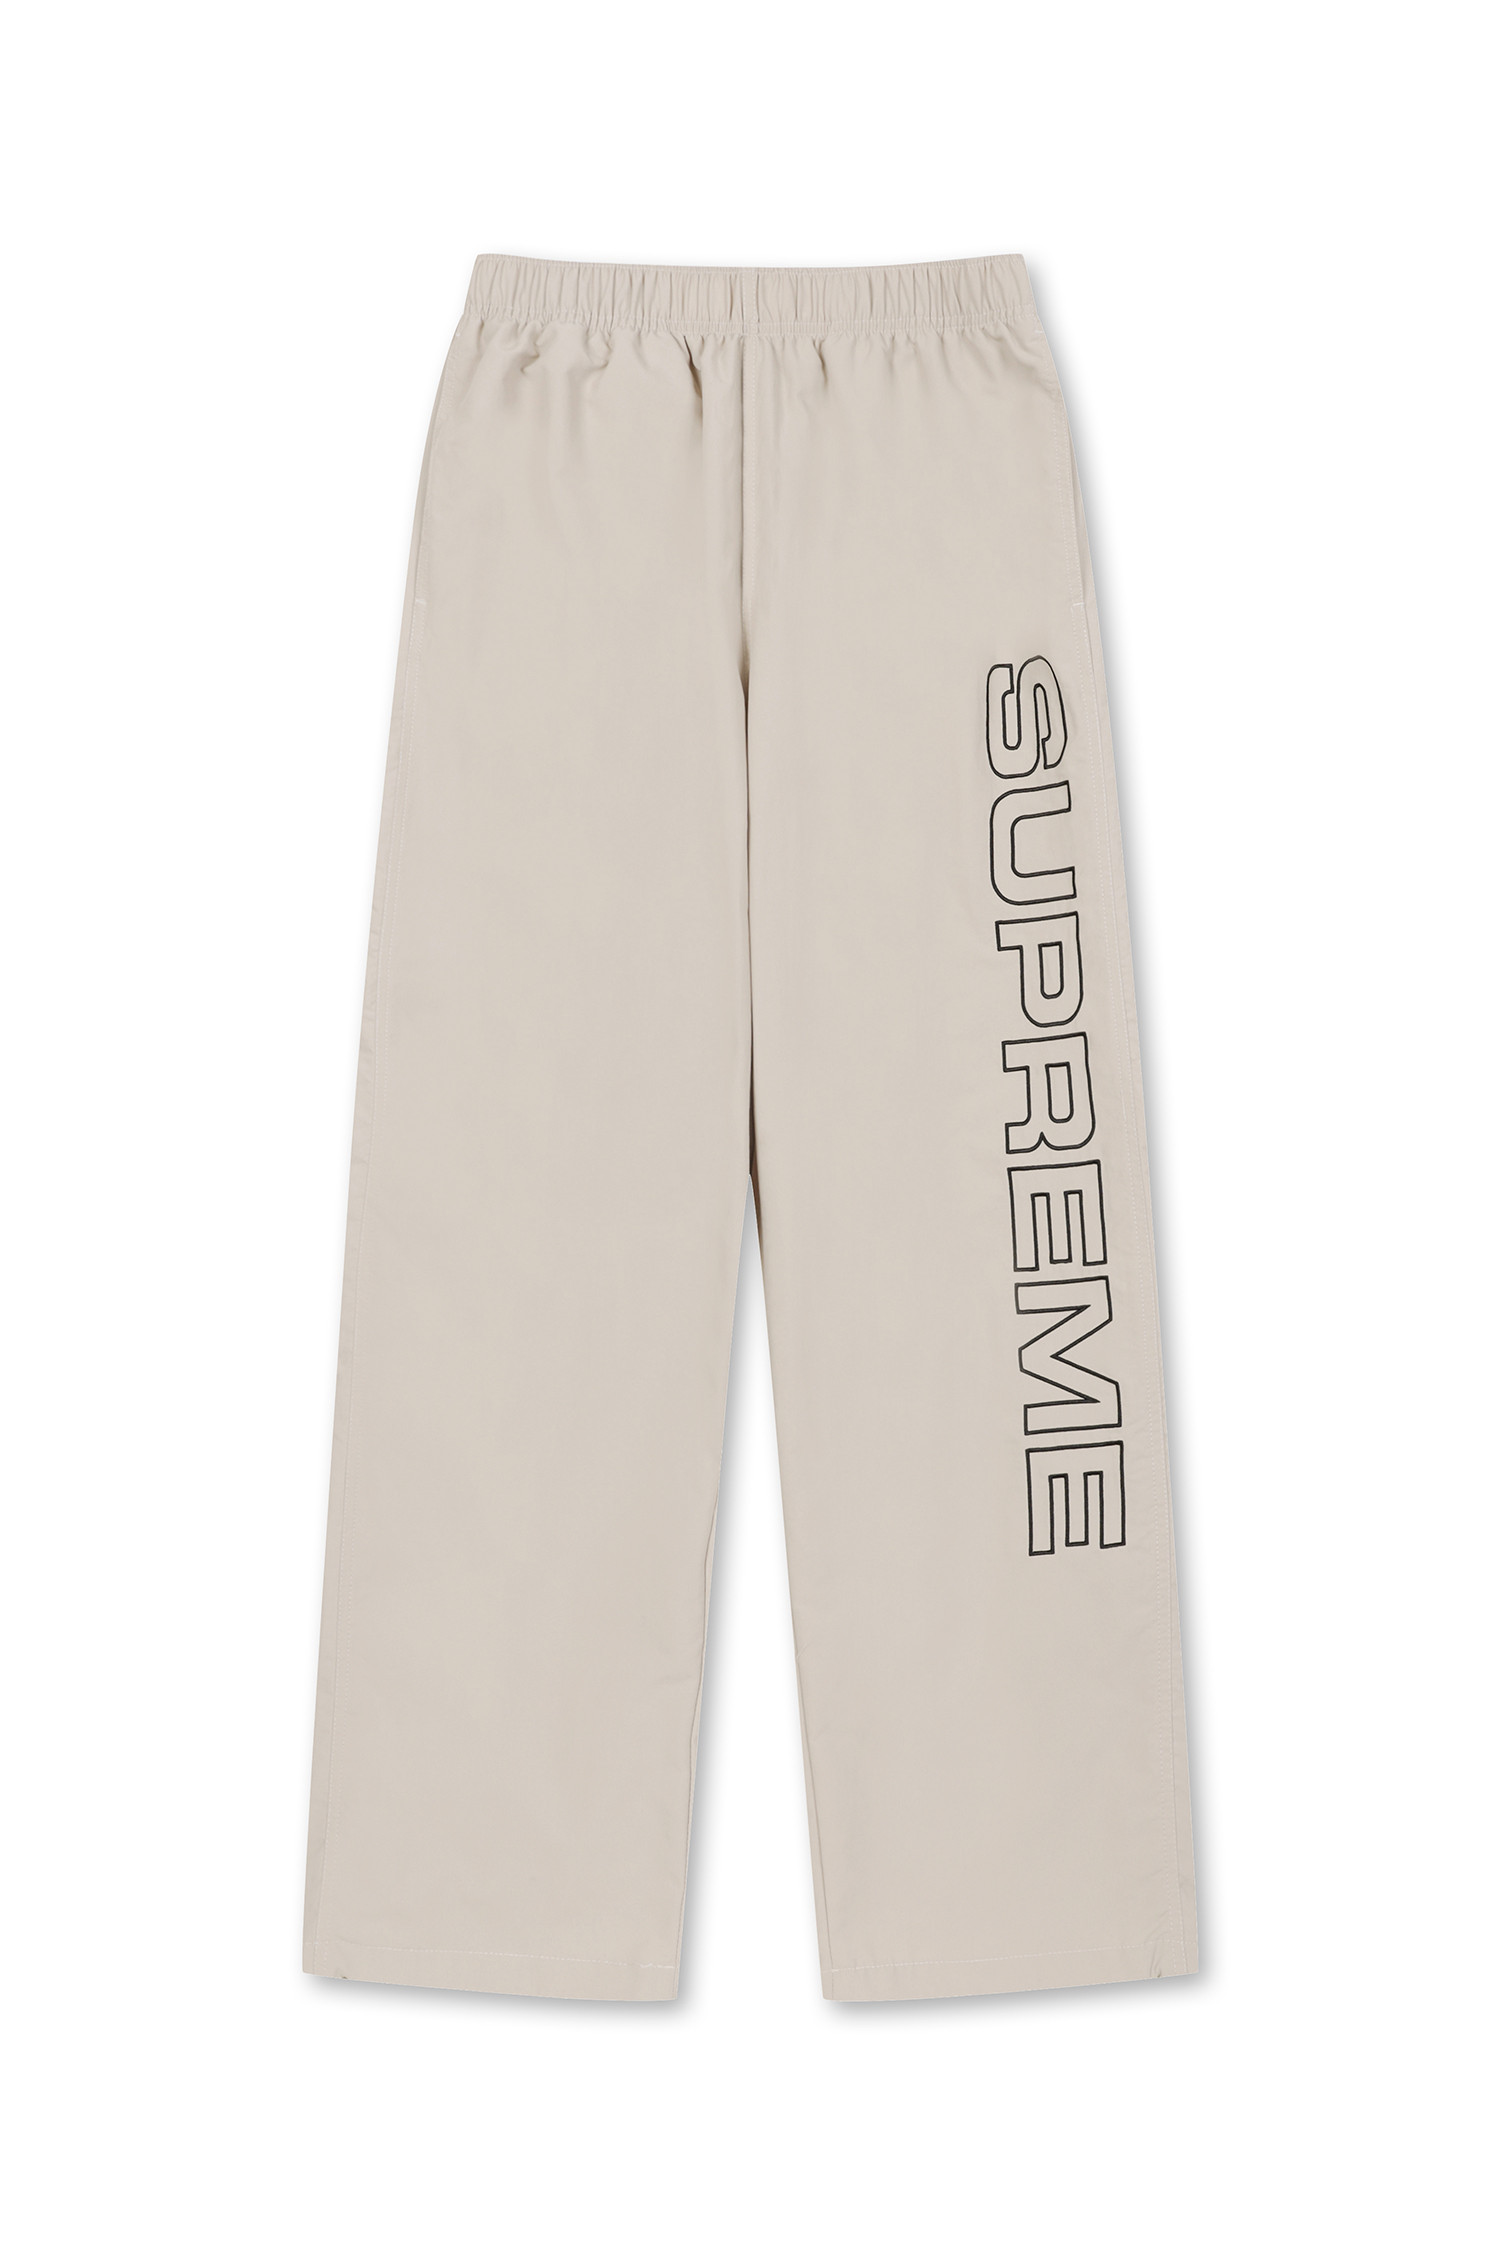 SUPREME] 23FW Spellout Embroidered Track Pants 스펠아웃 자수 트랙